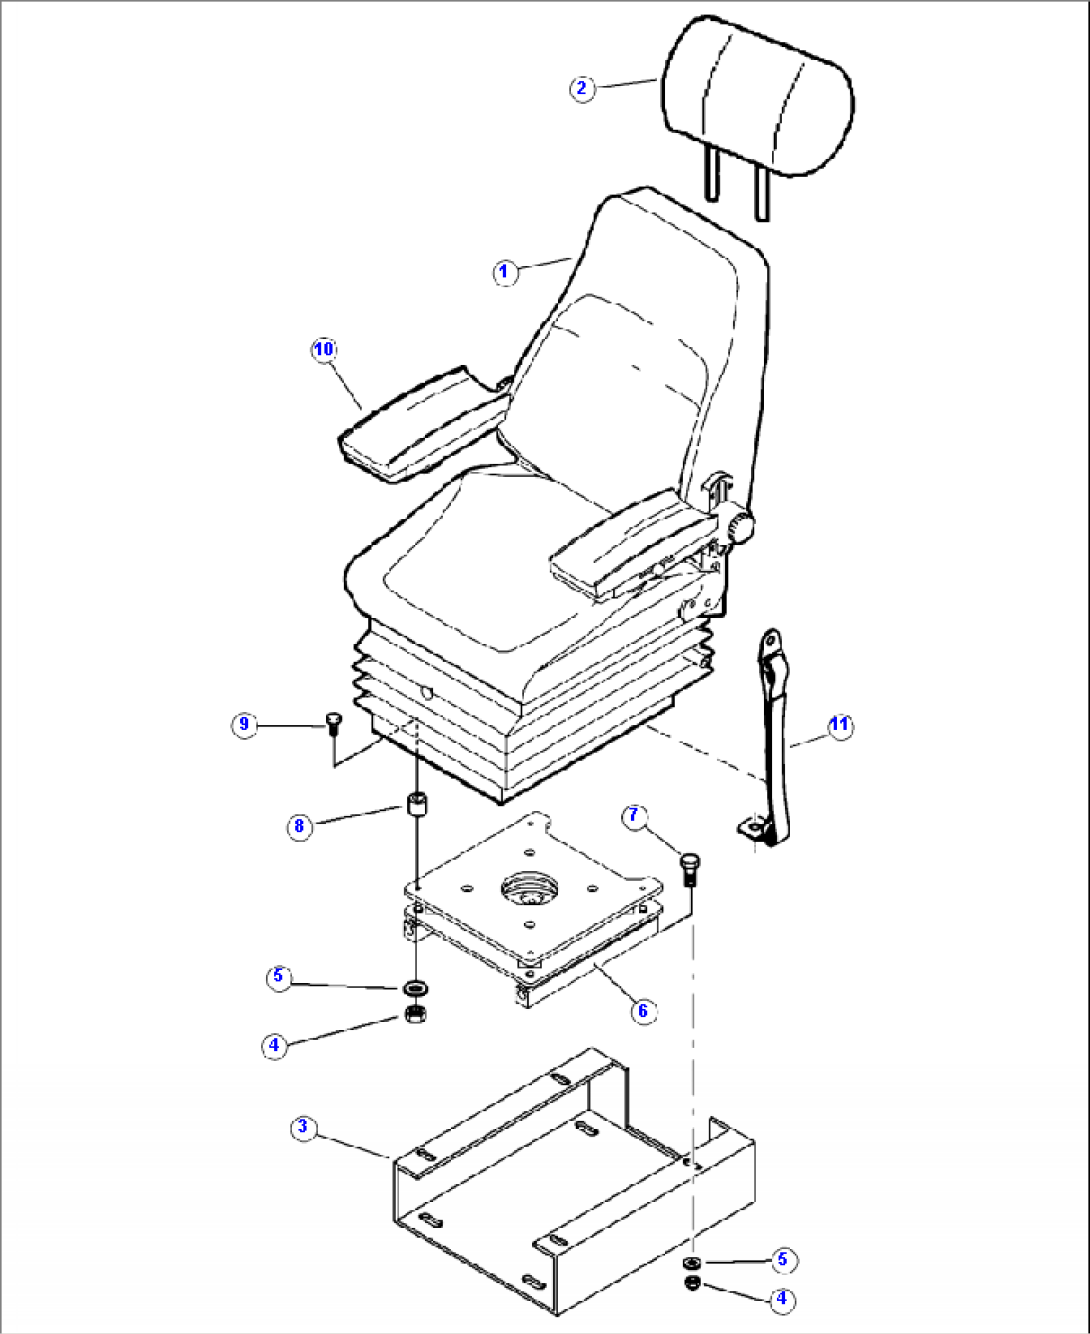 K0125-01A0 KAB OPERATOR SEAT AND MOUNTING